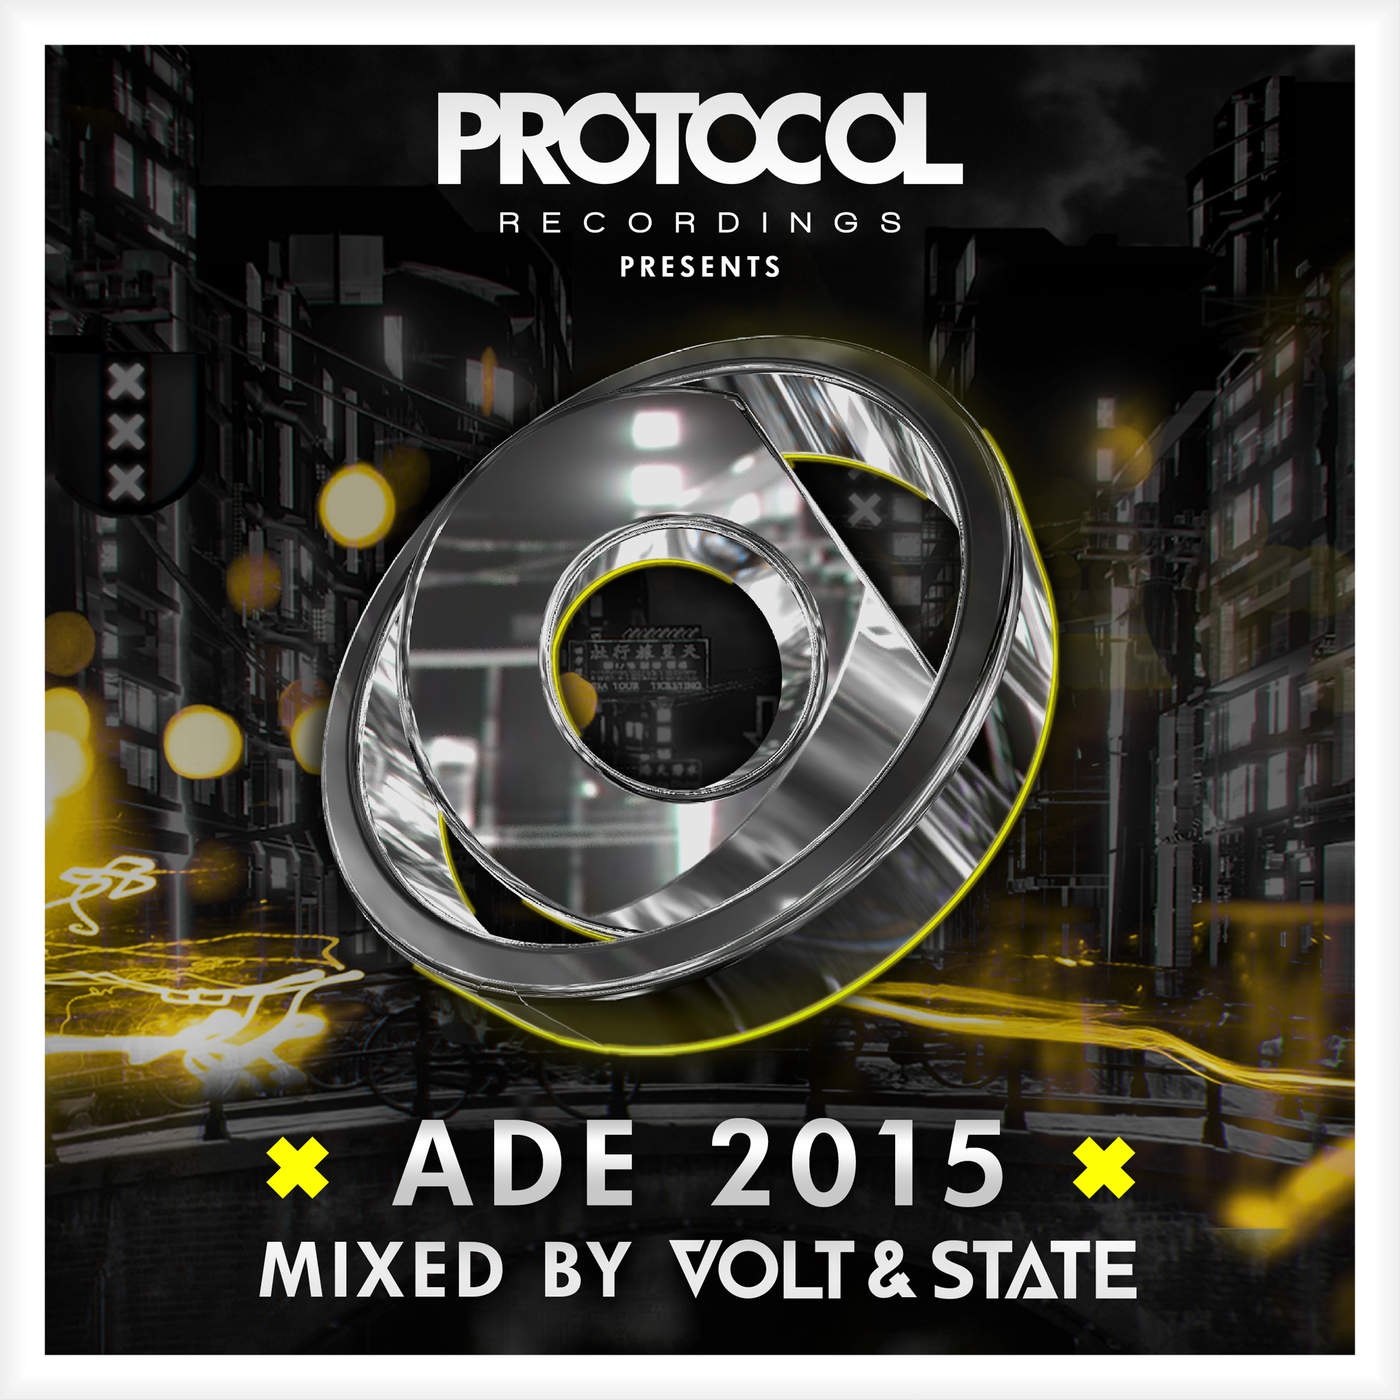 Protocol presents: ADE 2015 (Mixed by Volt & State) [Entire Continuous Mix]